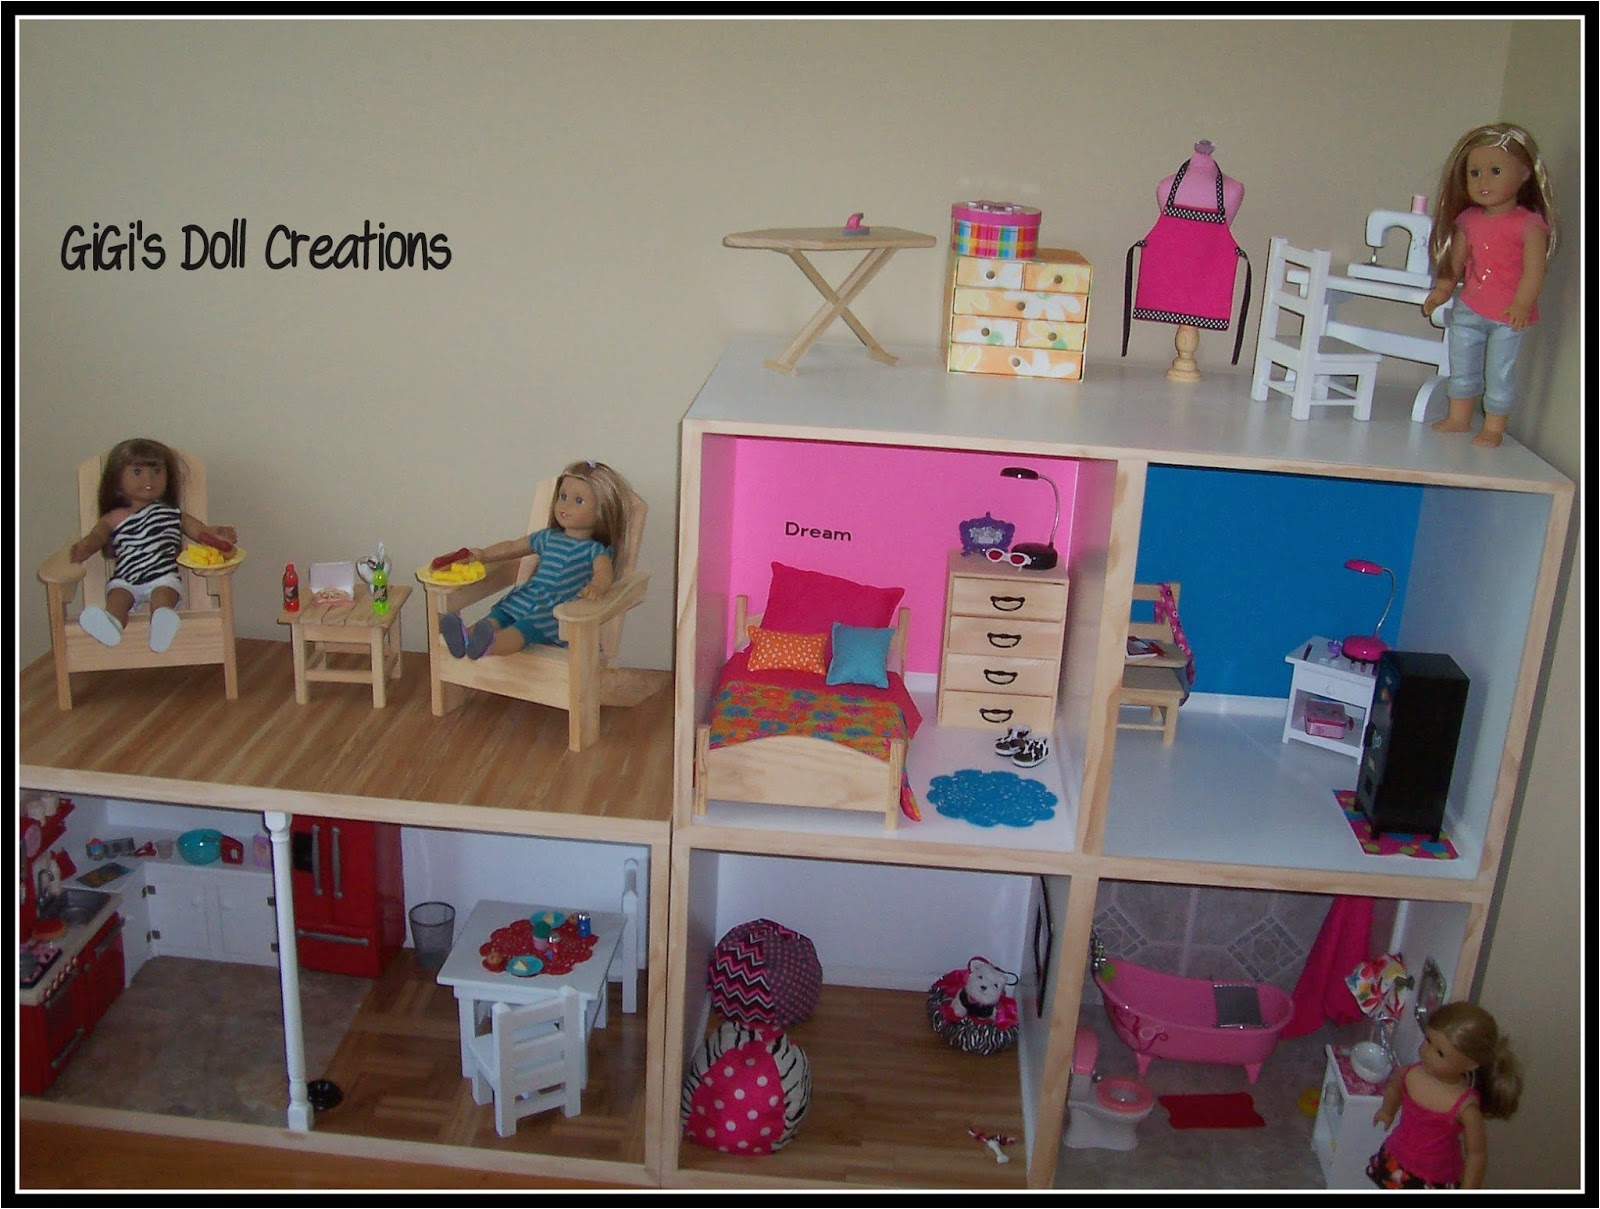 gigi s doll and craft creations american girl doll house tutorial